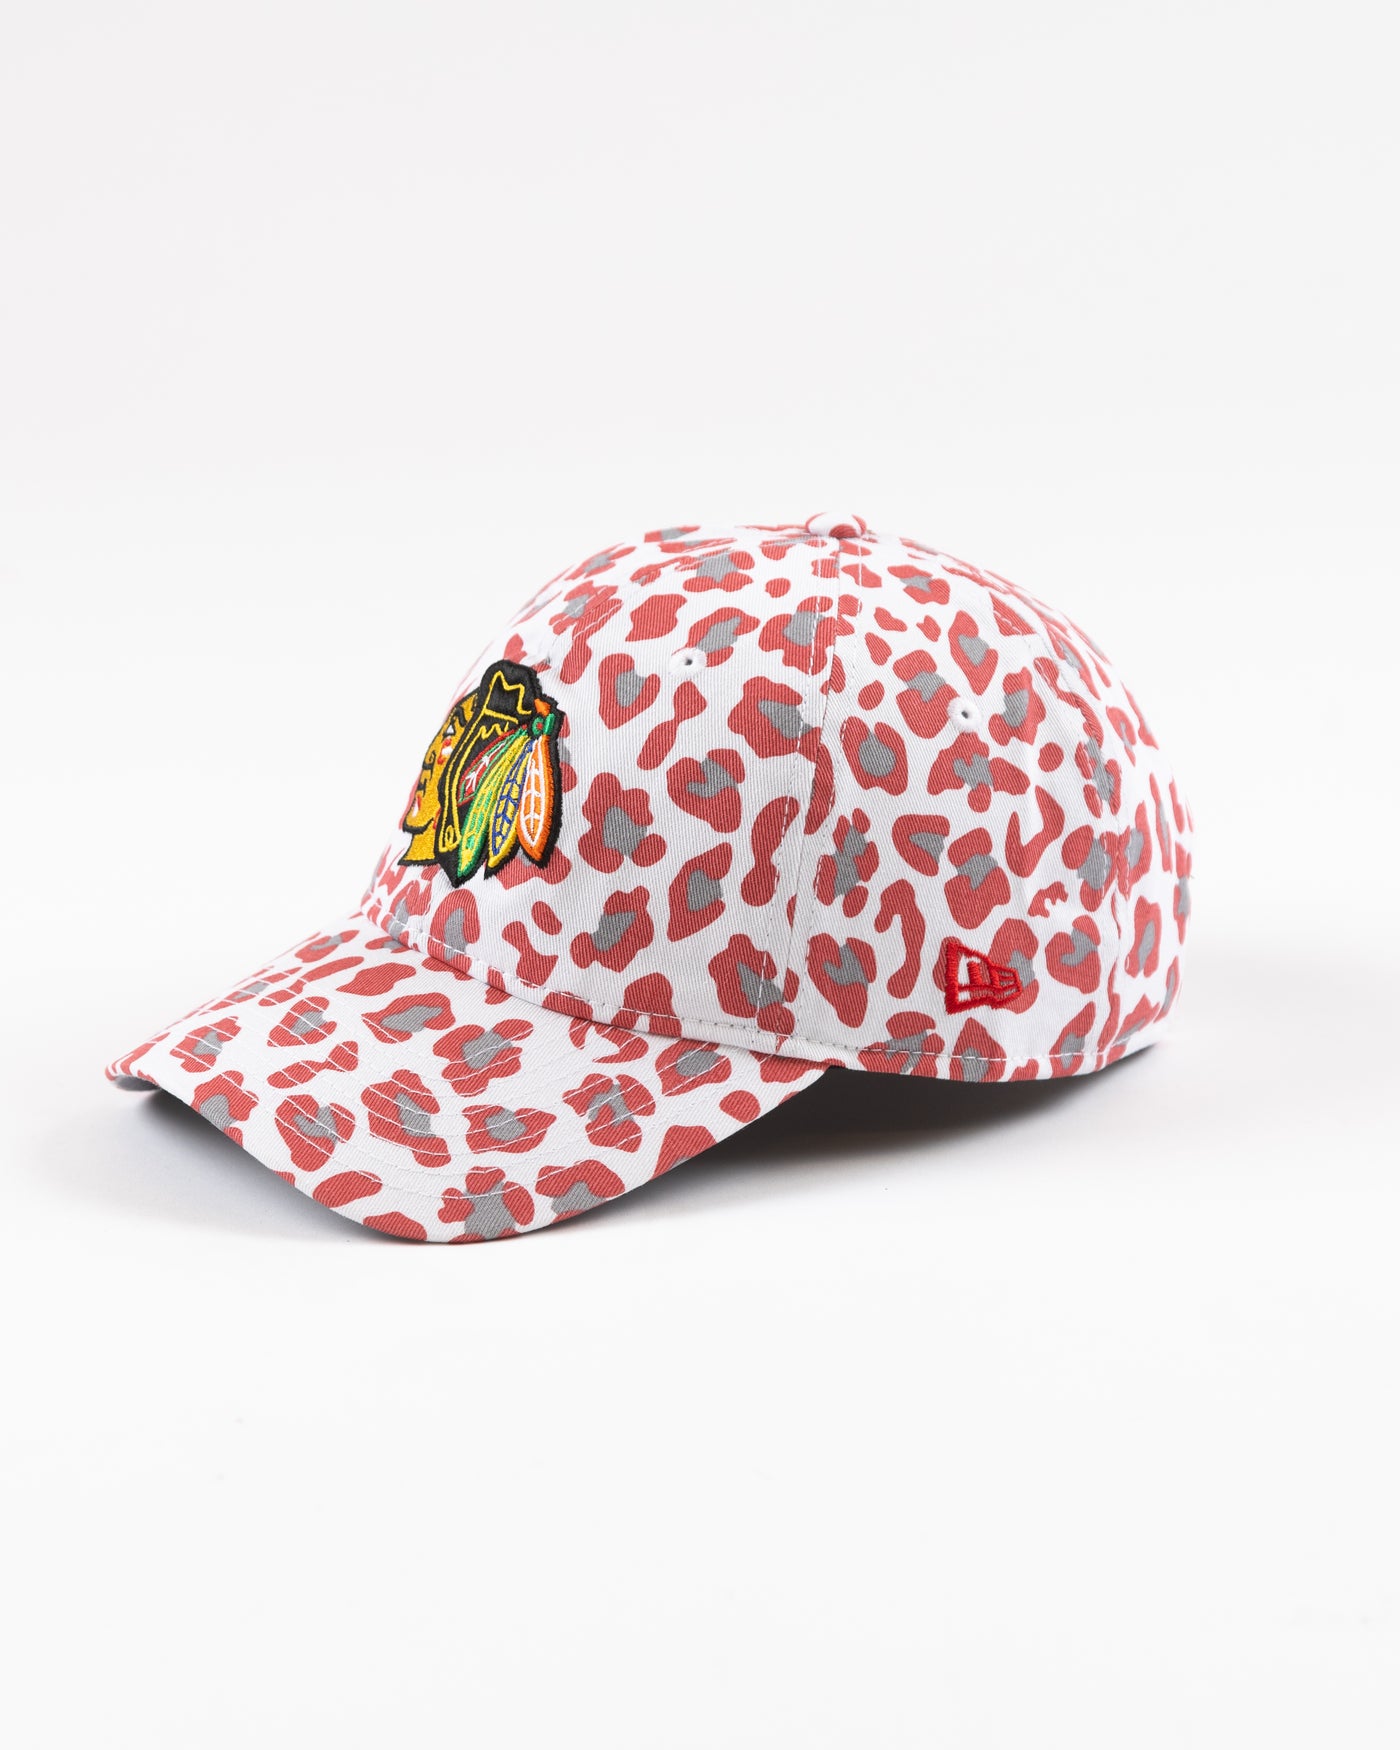 white New Era women's cap with all over pink cheetah print and Chicago Blackhawks primary logo on front - left angle lay flat